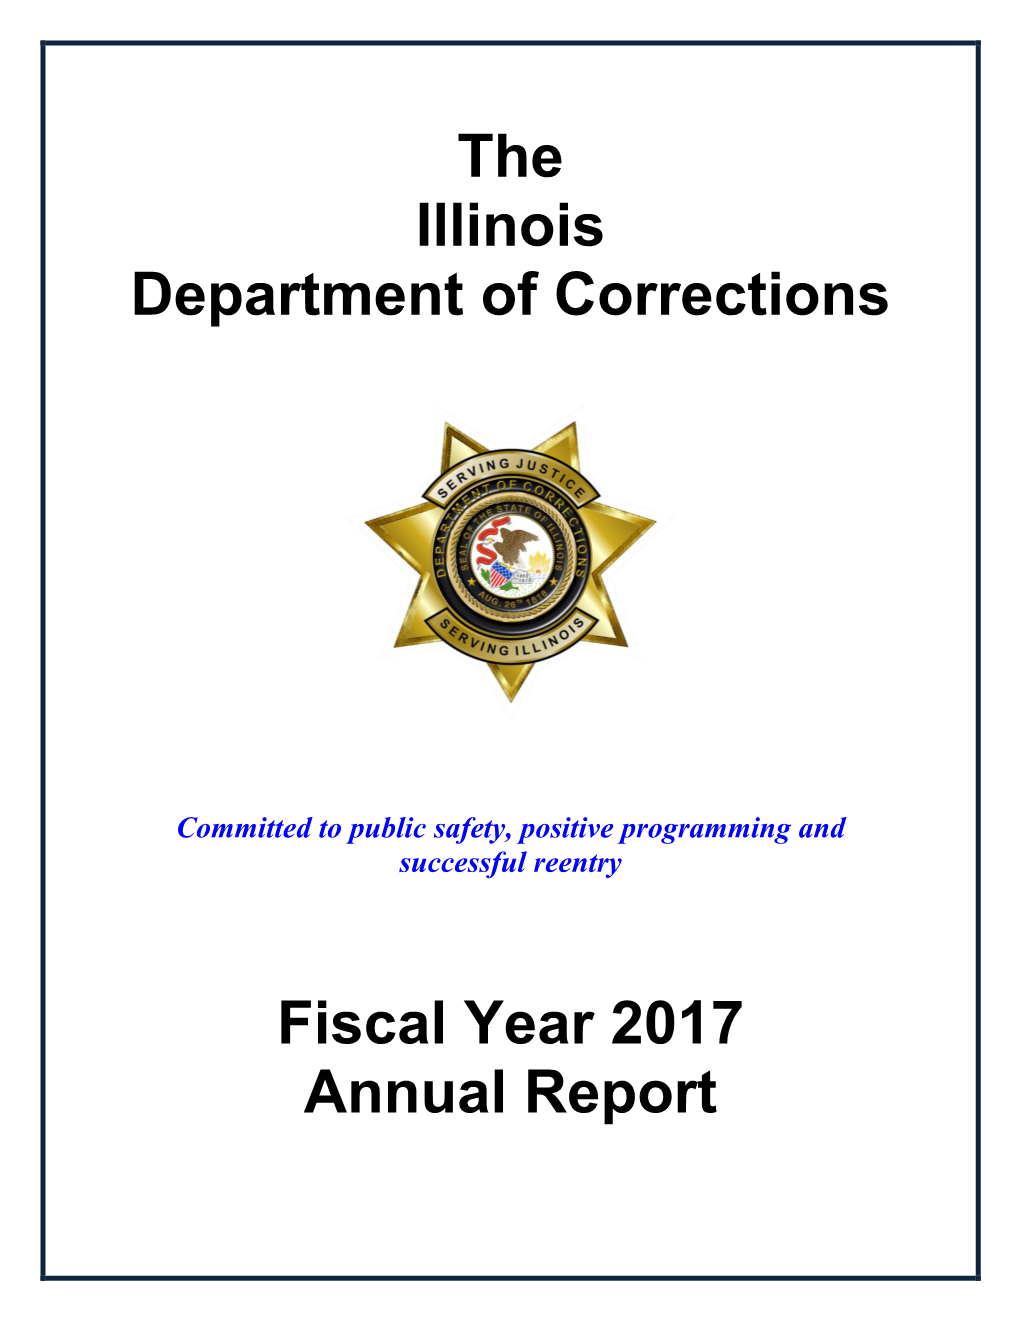 The Illinois Department of Corrections Fiscal Year 2017 Annual Report